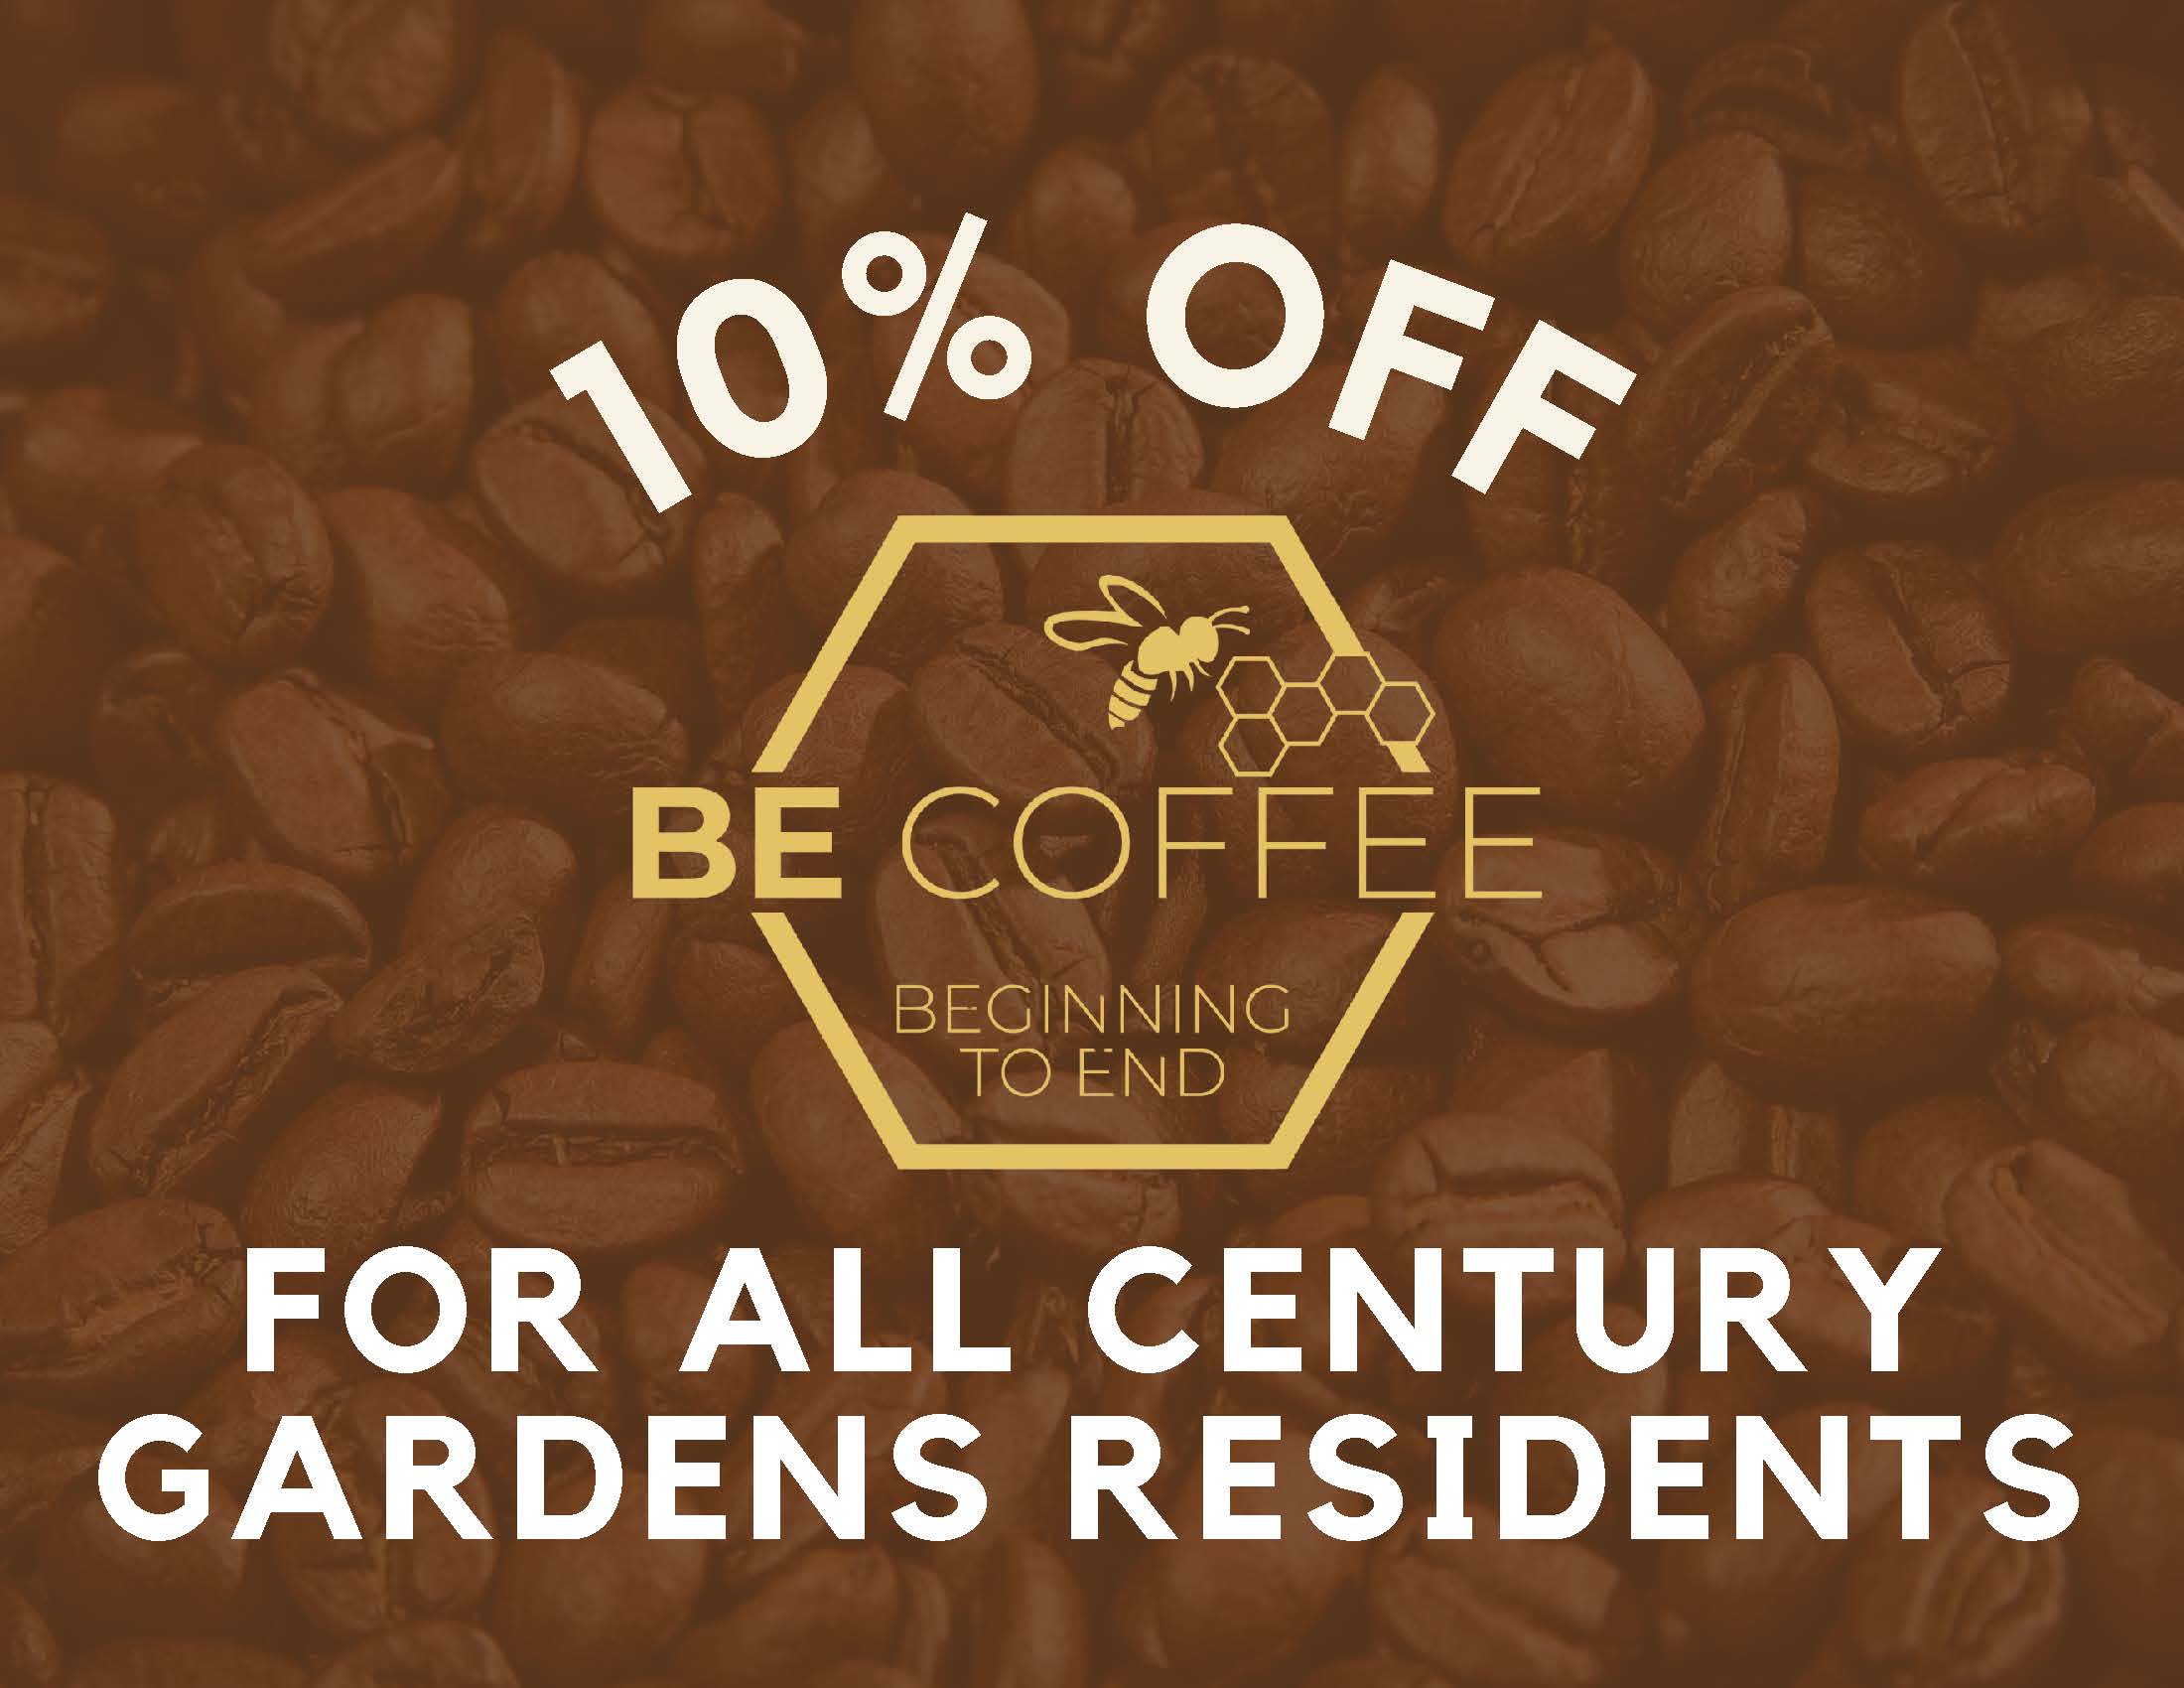 Be Coffee Beginning to End - 10% Off For All Century Gardens Residents